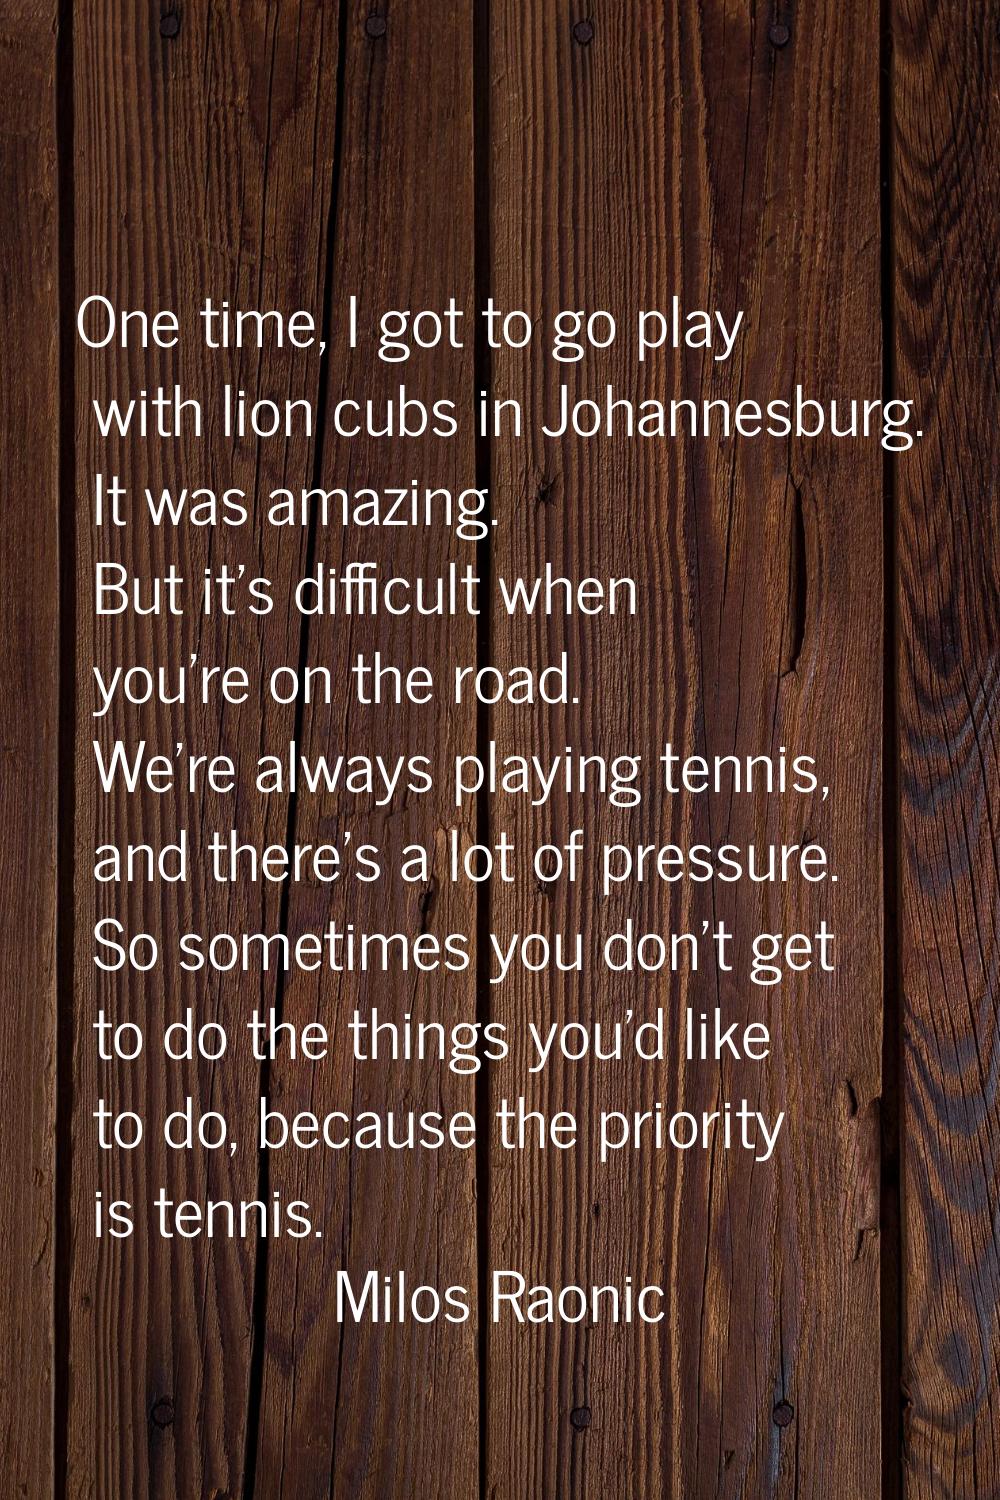 One time, I got to go play with lion cubs in Johannesburg. It was amazing. But it's difficult when 